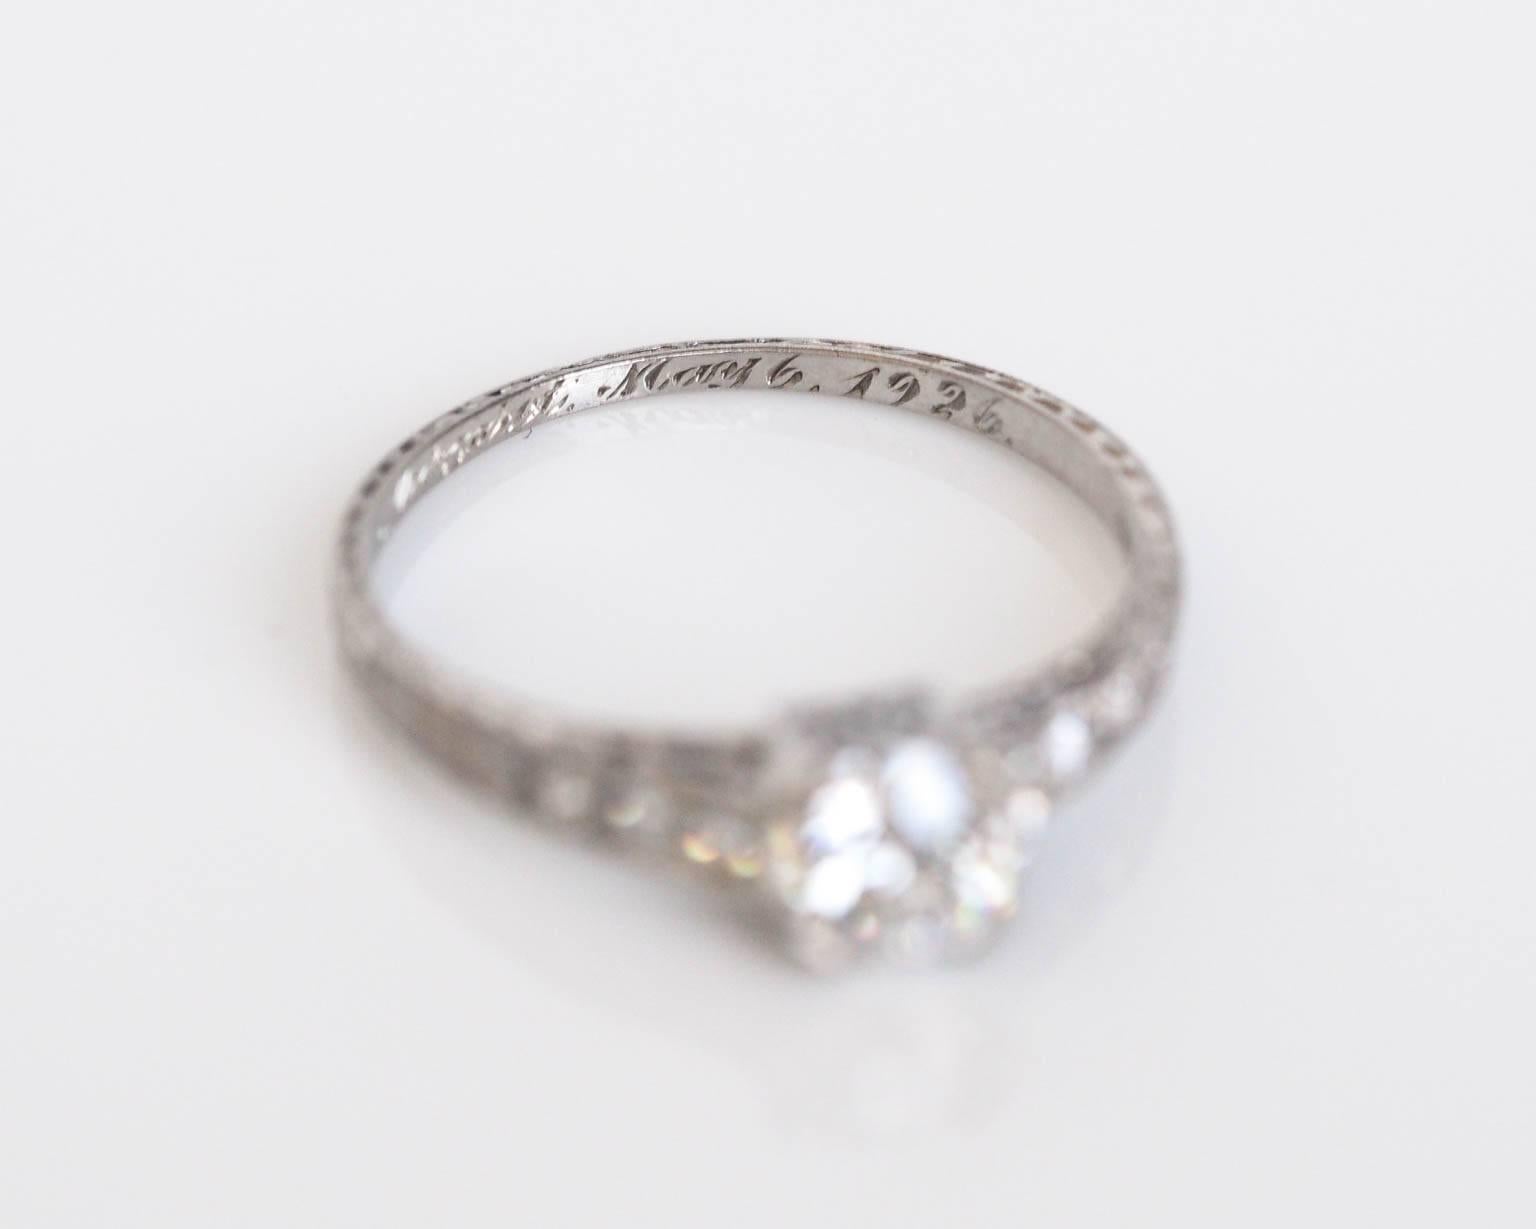 This piece is a special one, as the center diamond is an extremely white old european cut, with GIA paperwork stating 